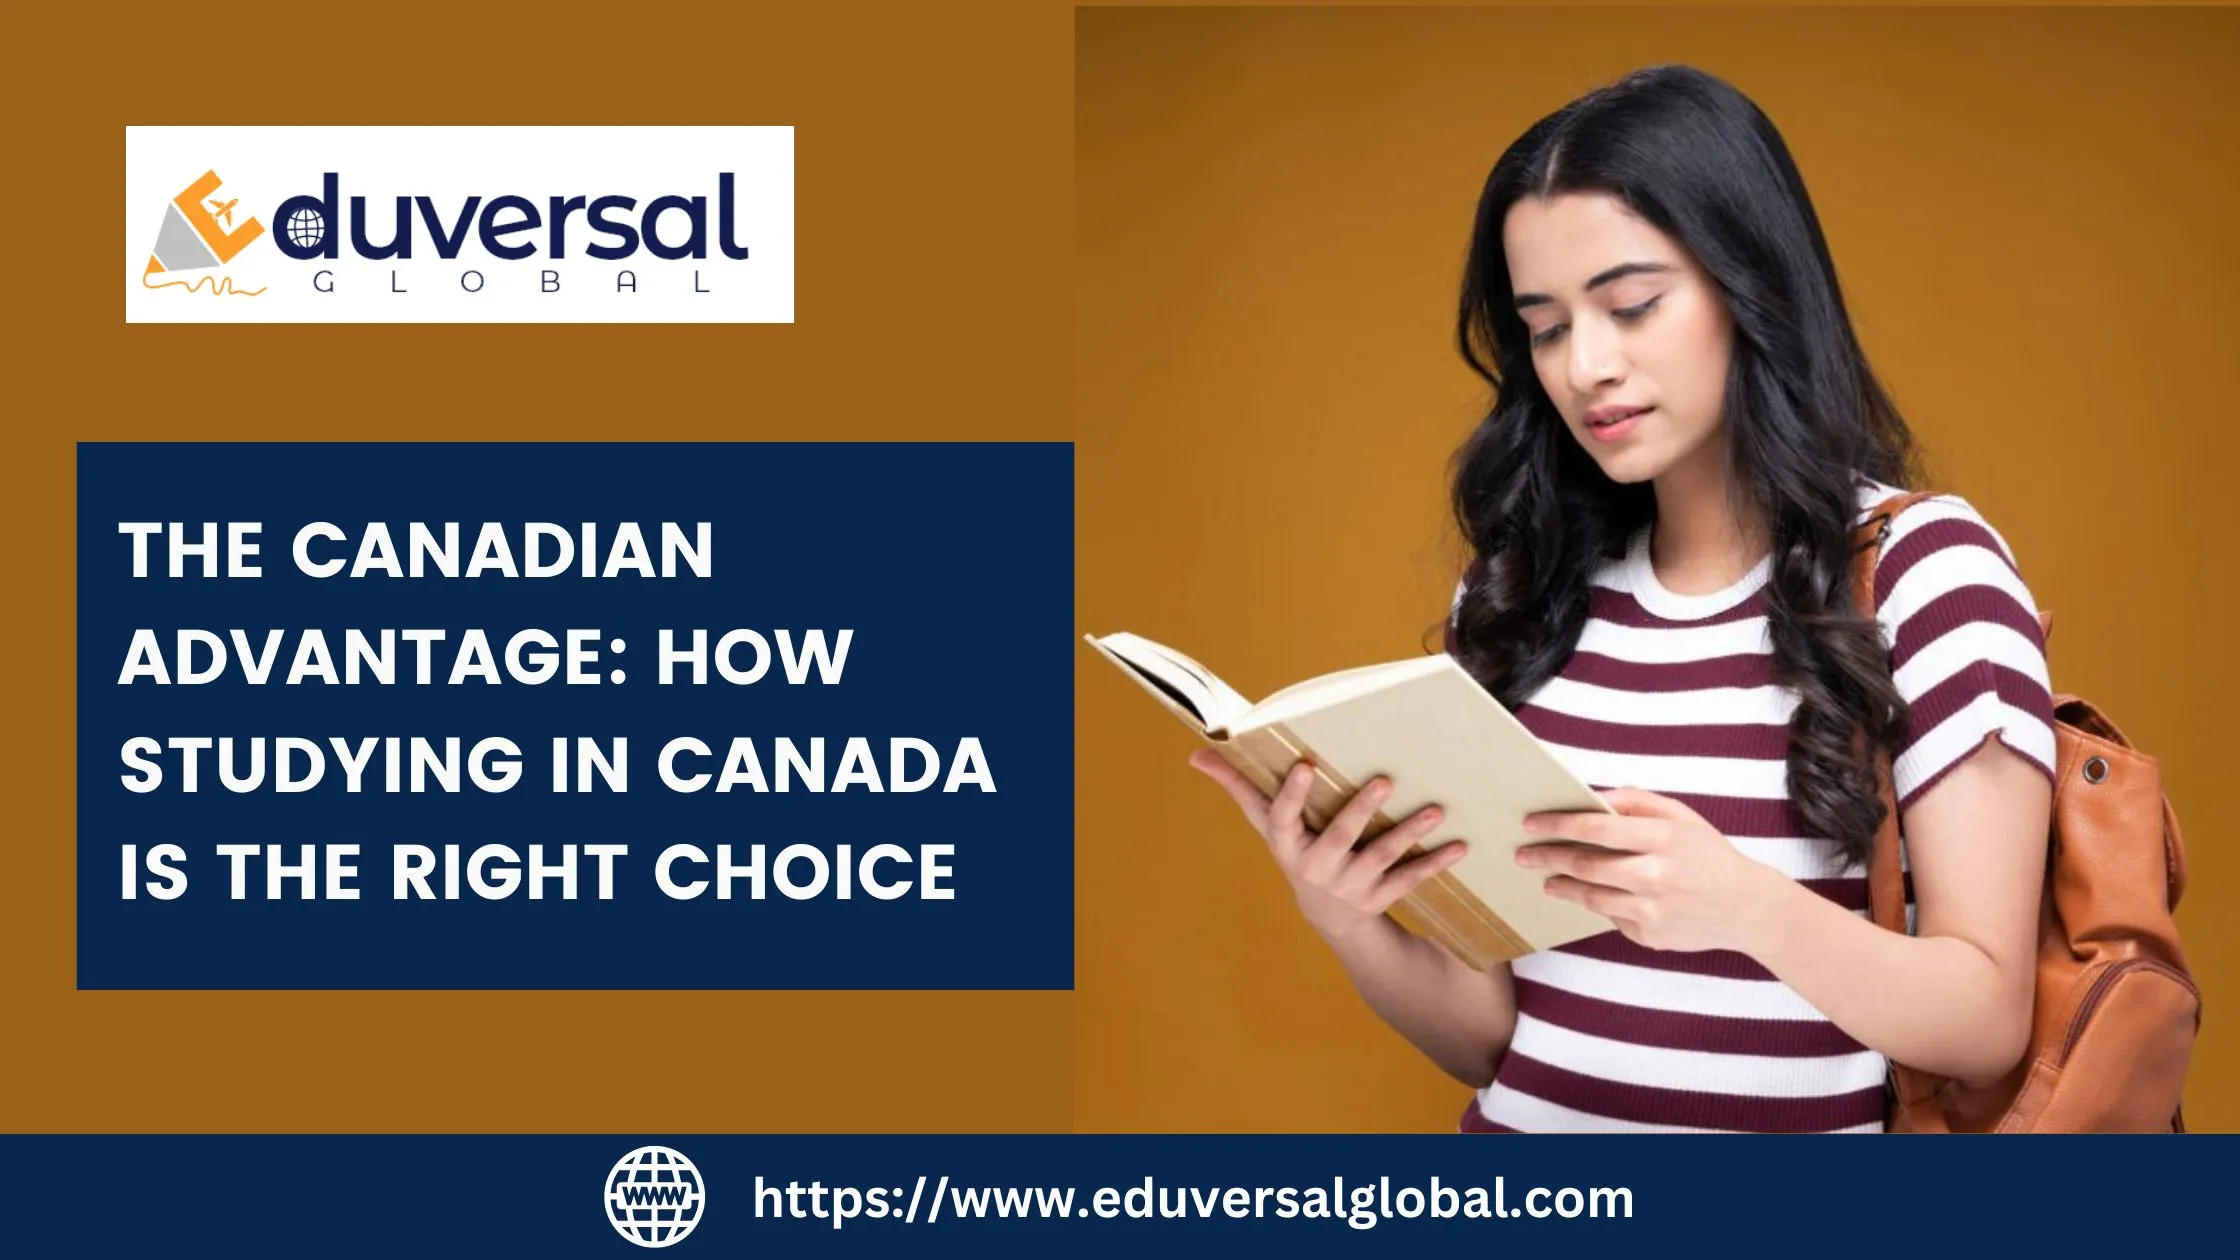 The Canadian Advantage: How Studying in Canada is the Right Choice